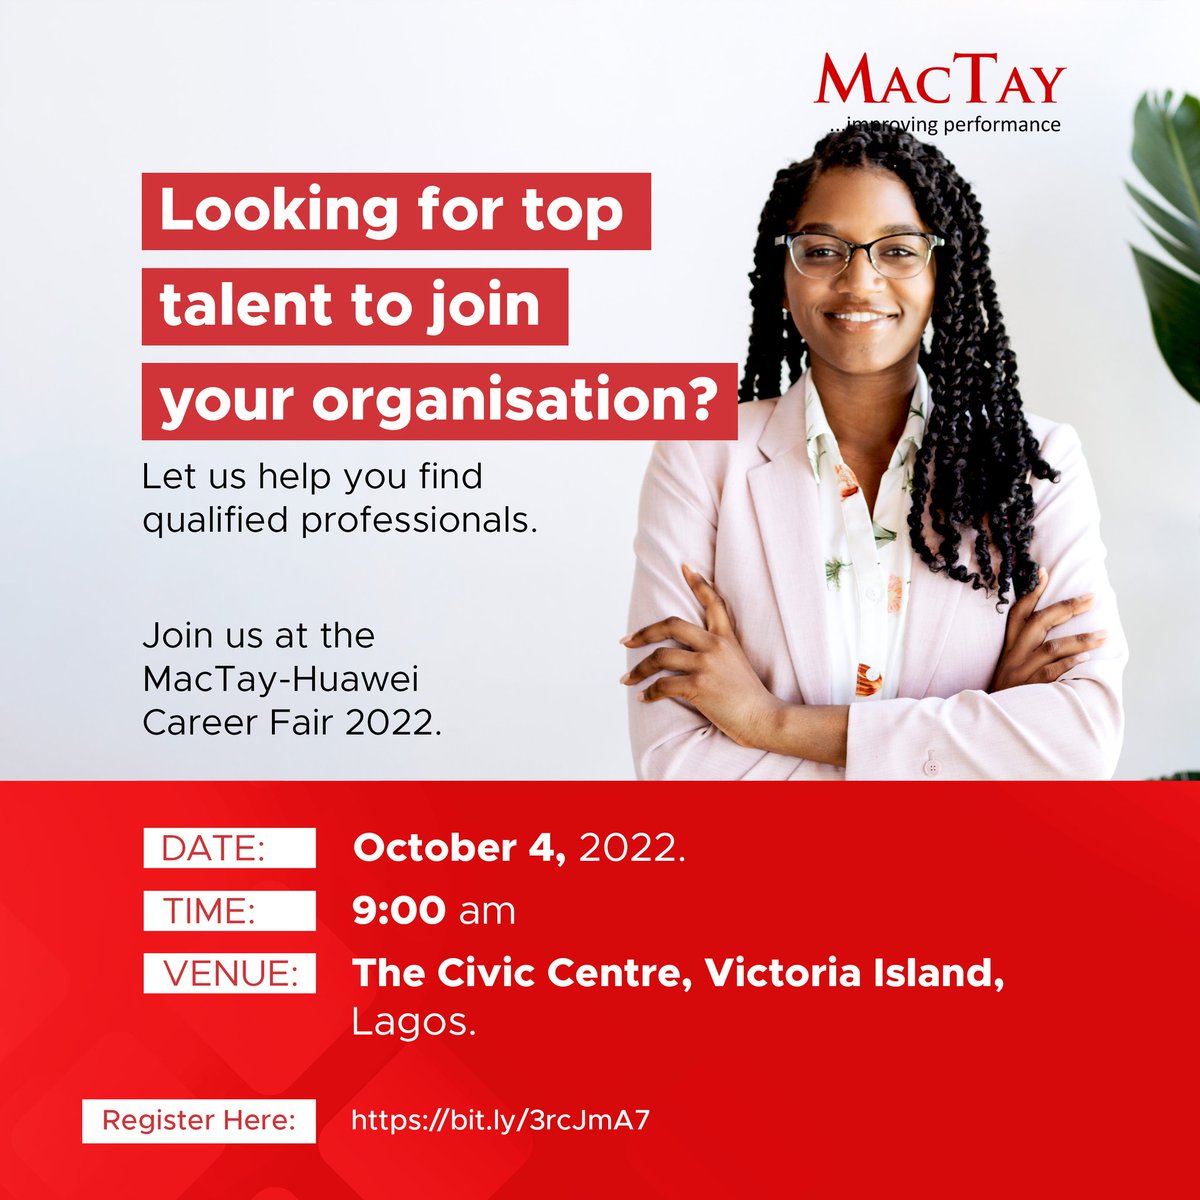 Are you looking for top talent for your company? 

Join us at the MacTay-Huawei Career Fair 2022.

For more information, please call: +2349139385550 or email: info@mactay.com

#MacTay #Careerfair #Jobfair #Lagosjobfair #hiring #nowhiring #recruitment #job #currentvacancies